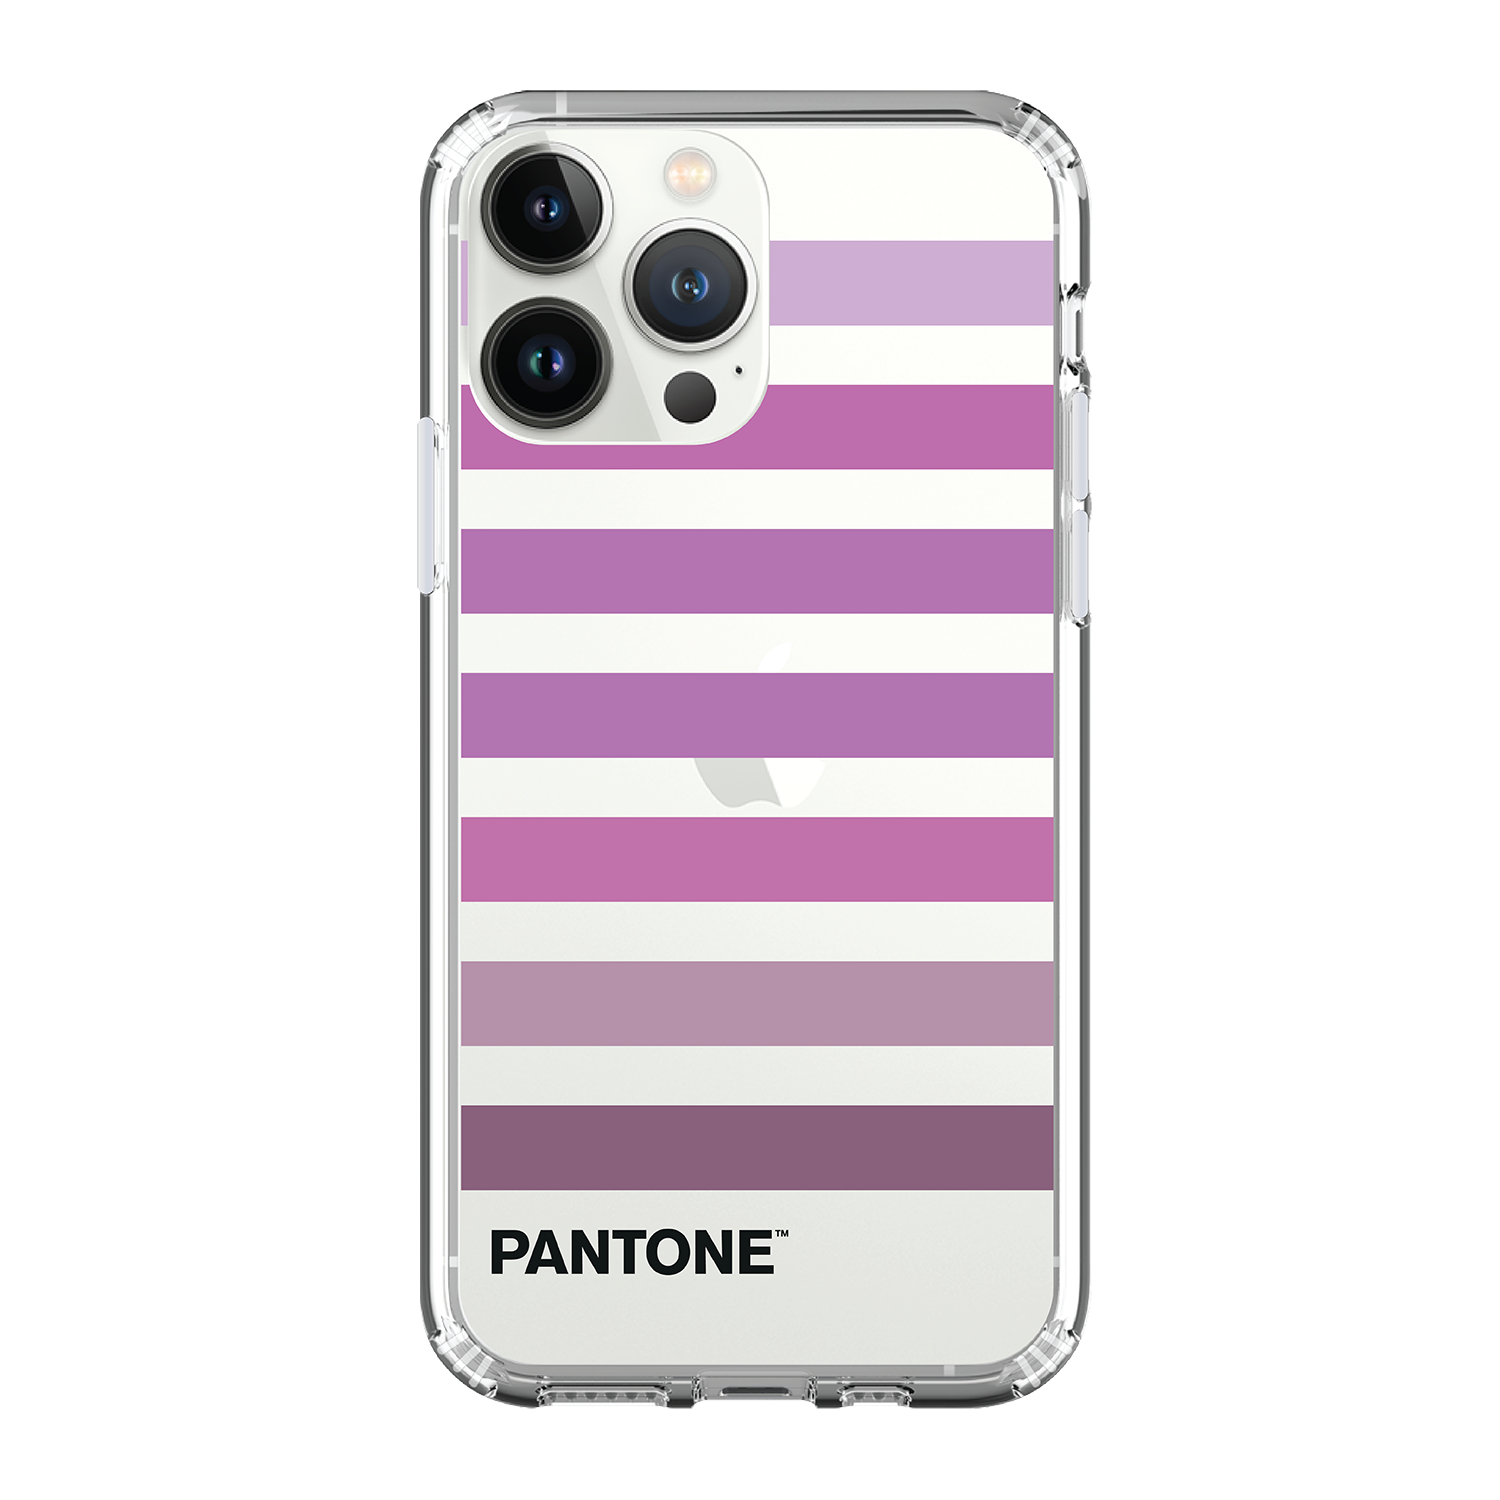 PANTONE Clear Case / iPhone Case / Android Case / Samsung Case 正版授權 全包邊氣囊防撞手機殼 (PE09)